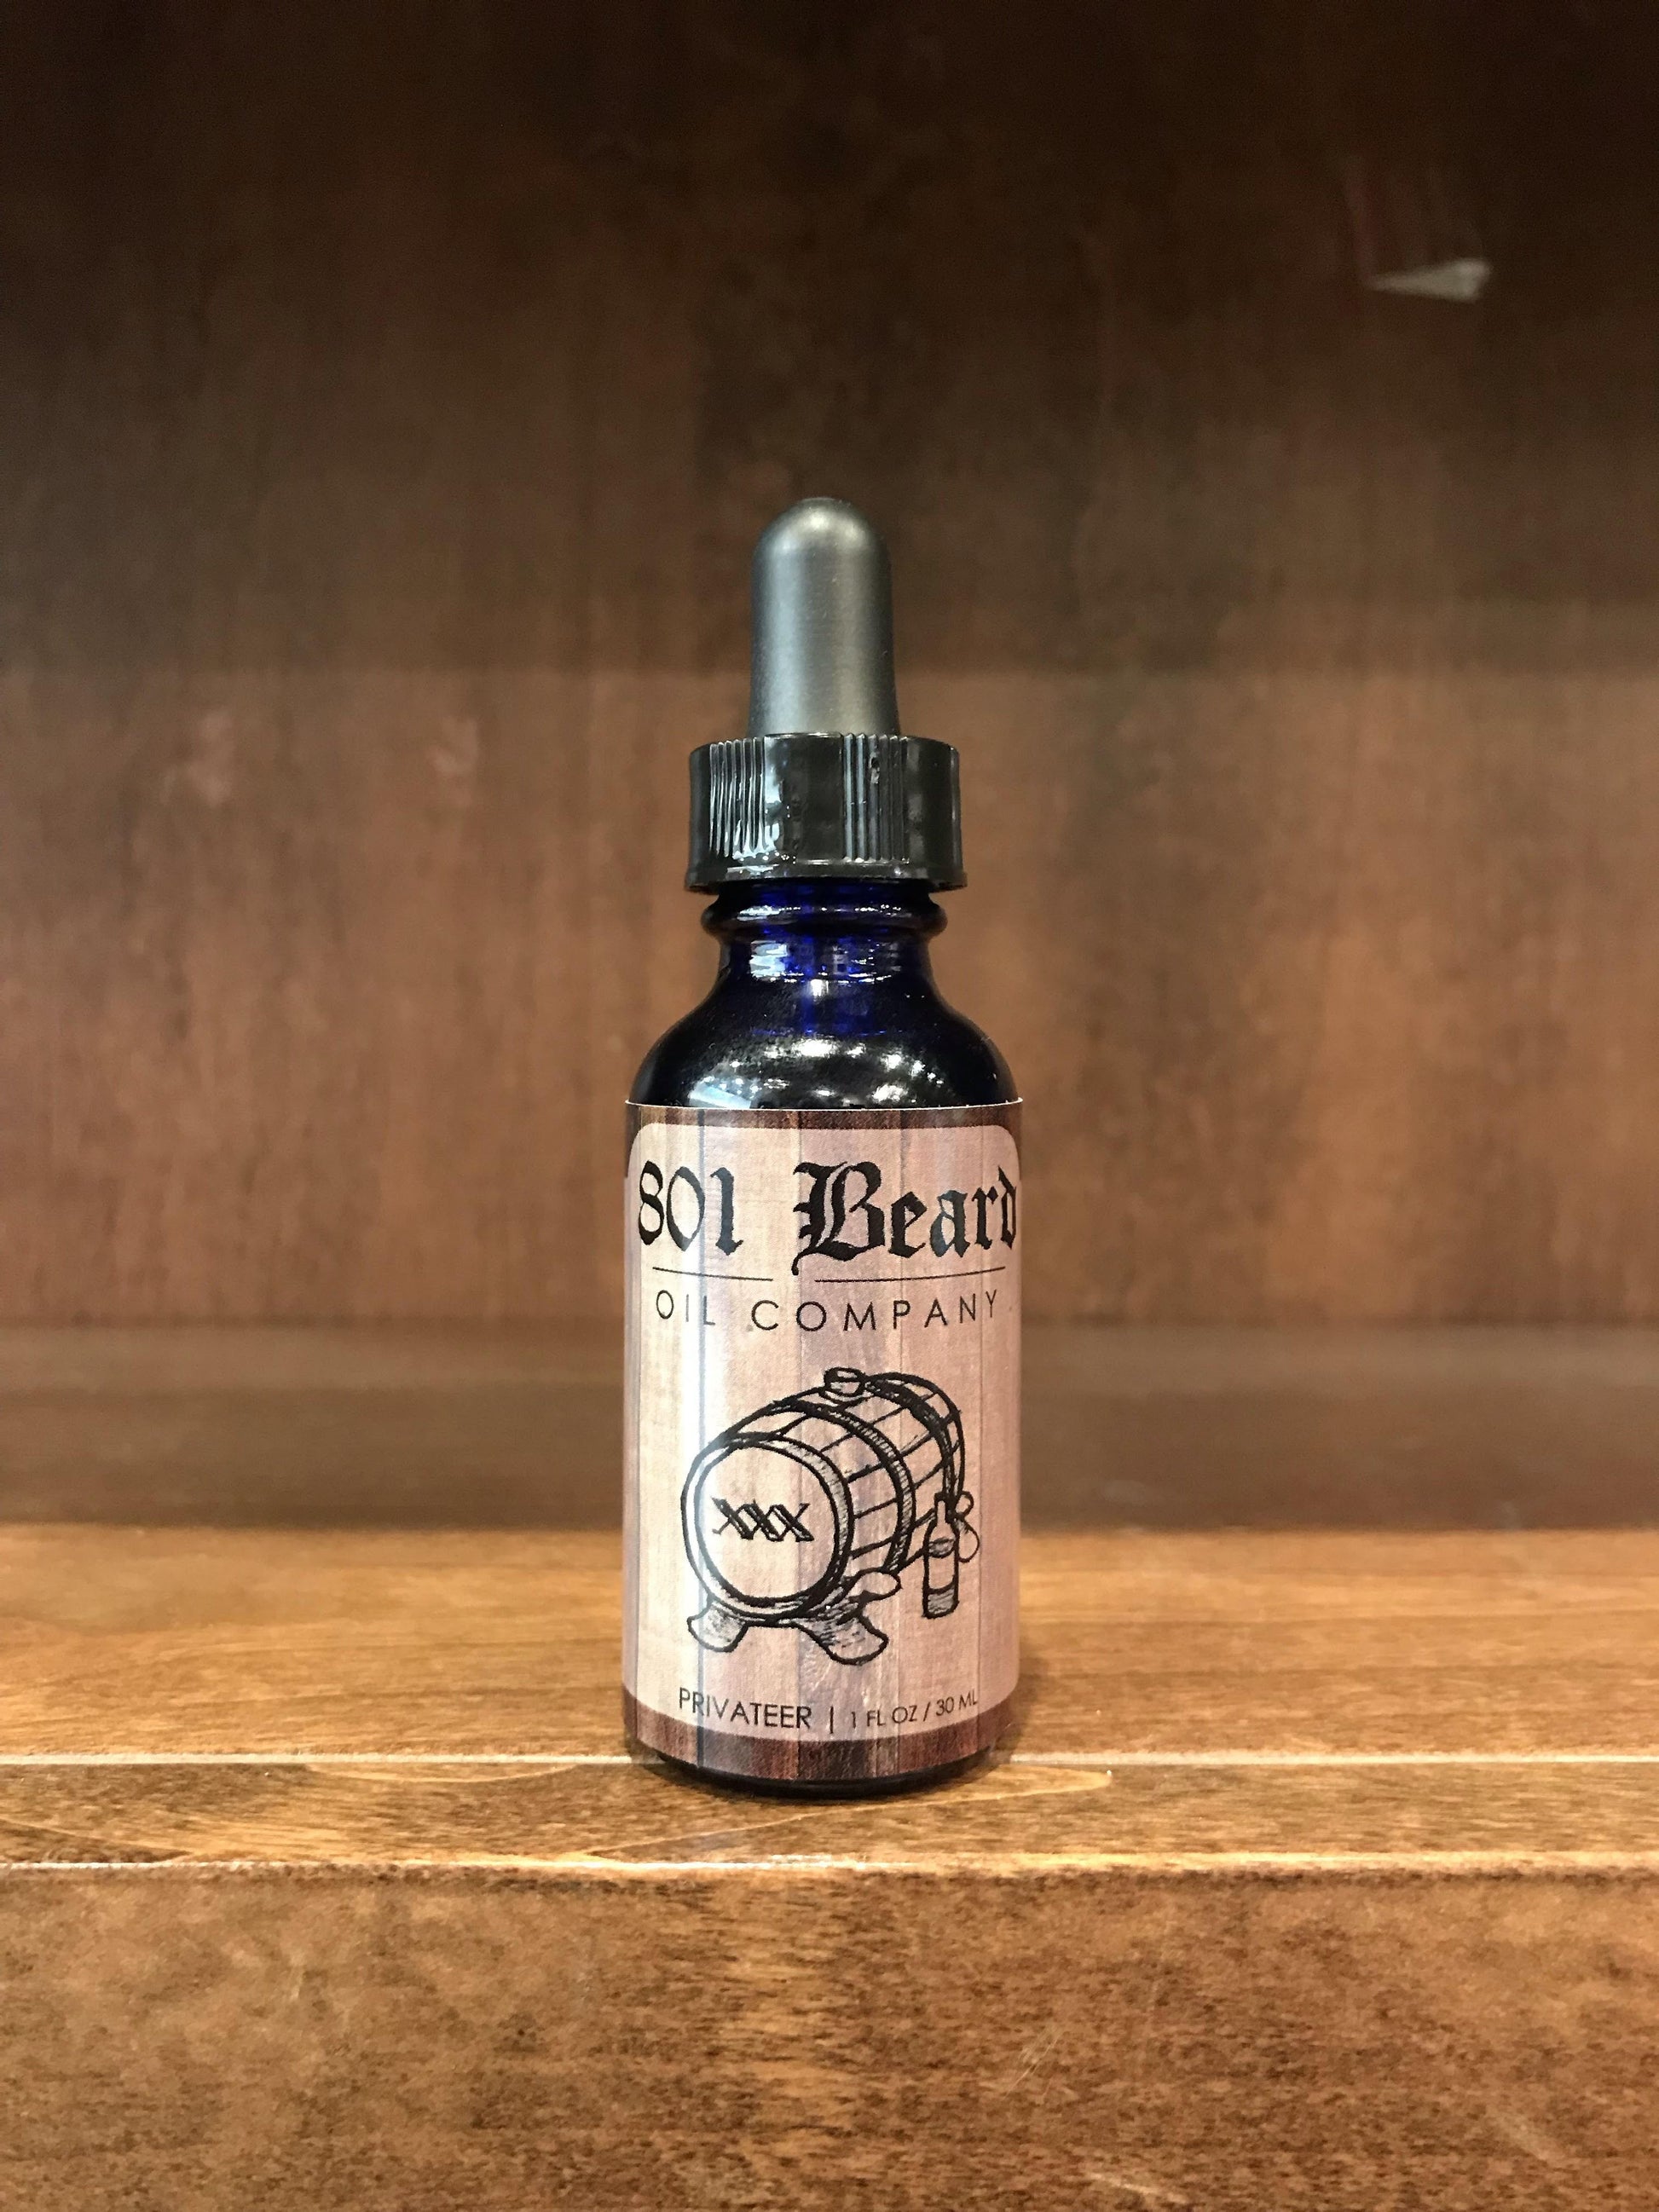 801 Beard Oil is rumored to be the best beard oil around. Not only will you enjoy the delectable fragrances of 801 Beard Oil, but you'll also get healthier skin, less itch, and a softer face mane. Men, your beard and skin will thank you for it. Trust us. For the men who want a longer, fuller and healthier beard with scents that invigorate and excite. Sold at Mini Moustachery, the all-in-one mens care, grooming, and barber supply depot.